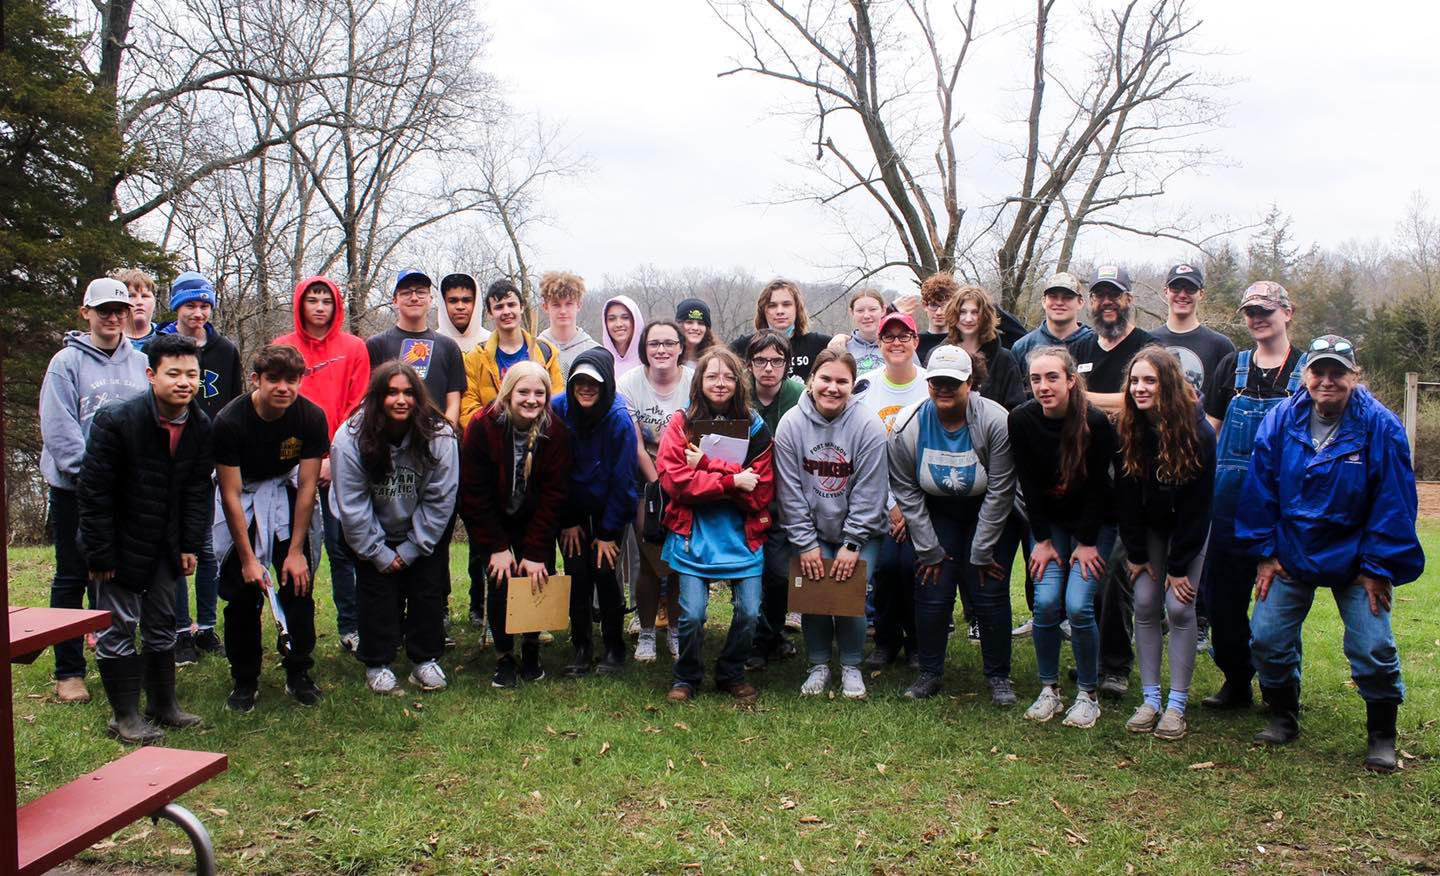 FMHS students went out to Wilson Lake for work to celebrate Earth Day Friday. Students got in-class demonstrations and outdoor work in honor of the day. Photo courtesy of FMHS